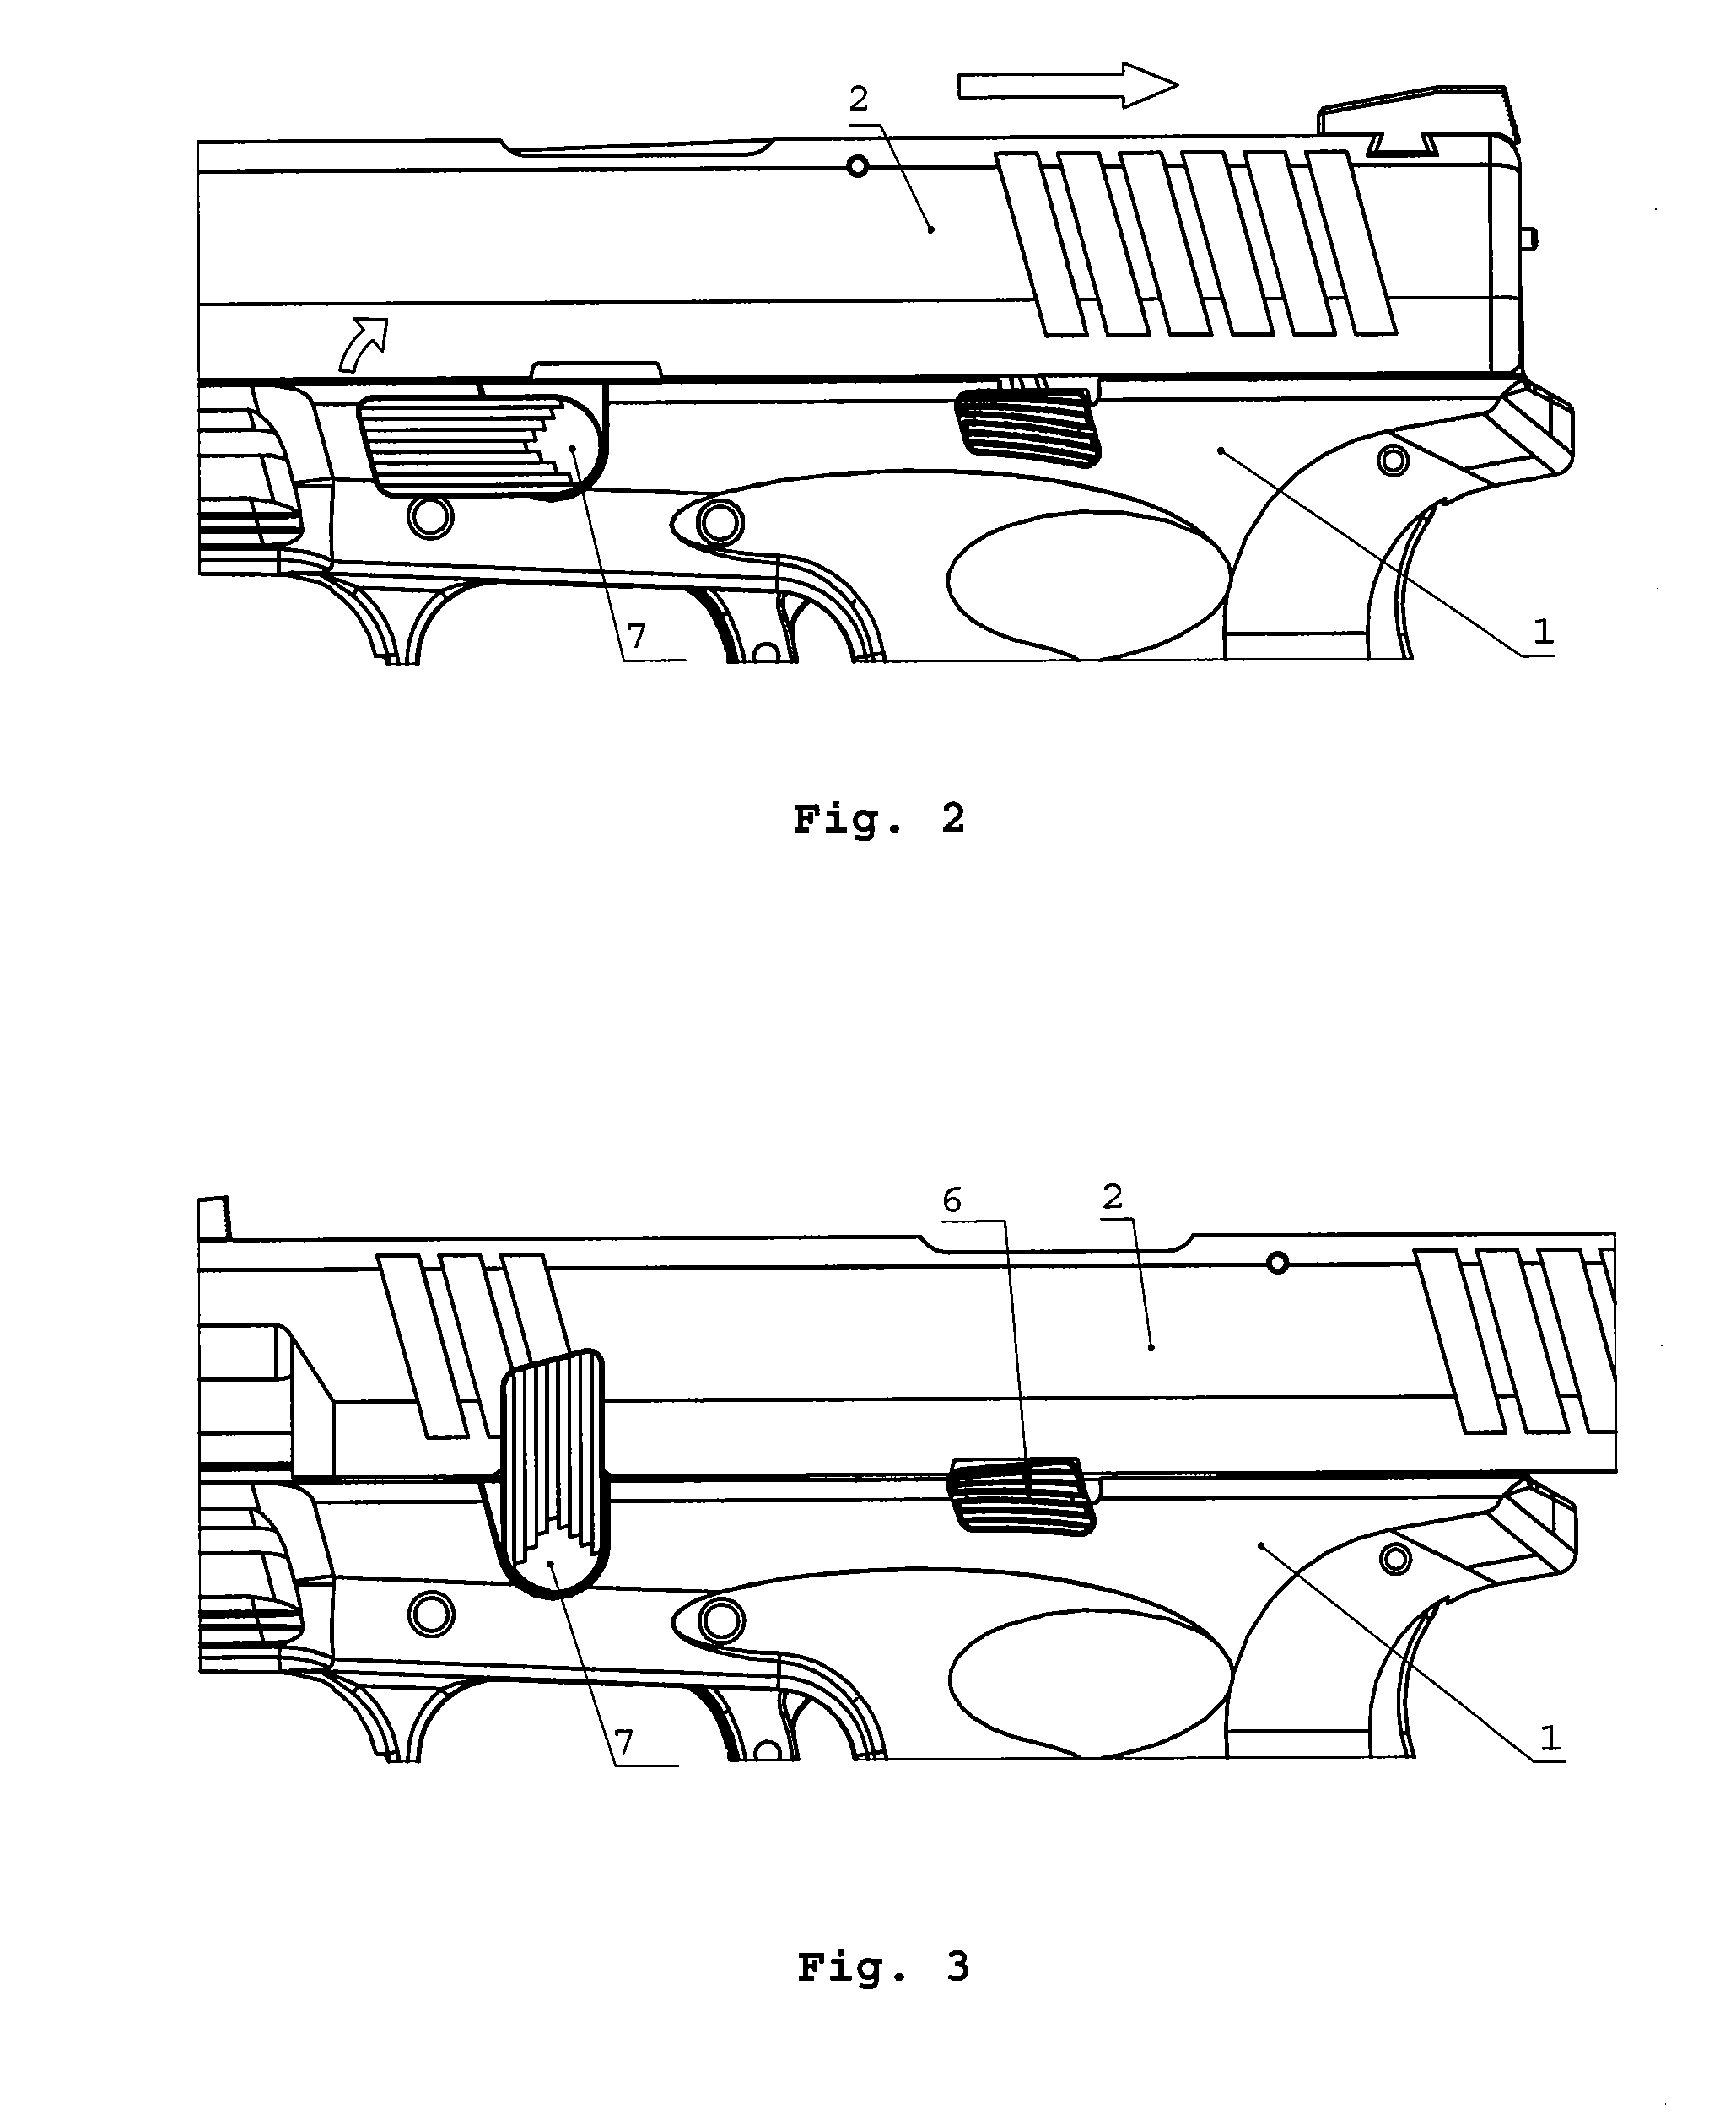 Mechanism for the disassembly of a handgun without triggering